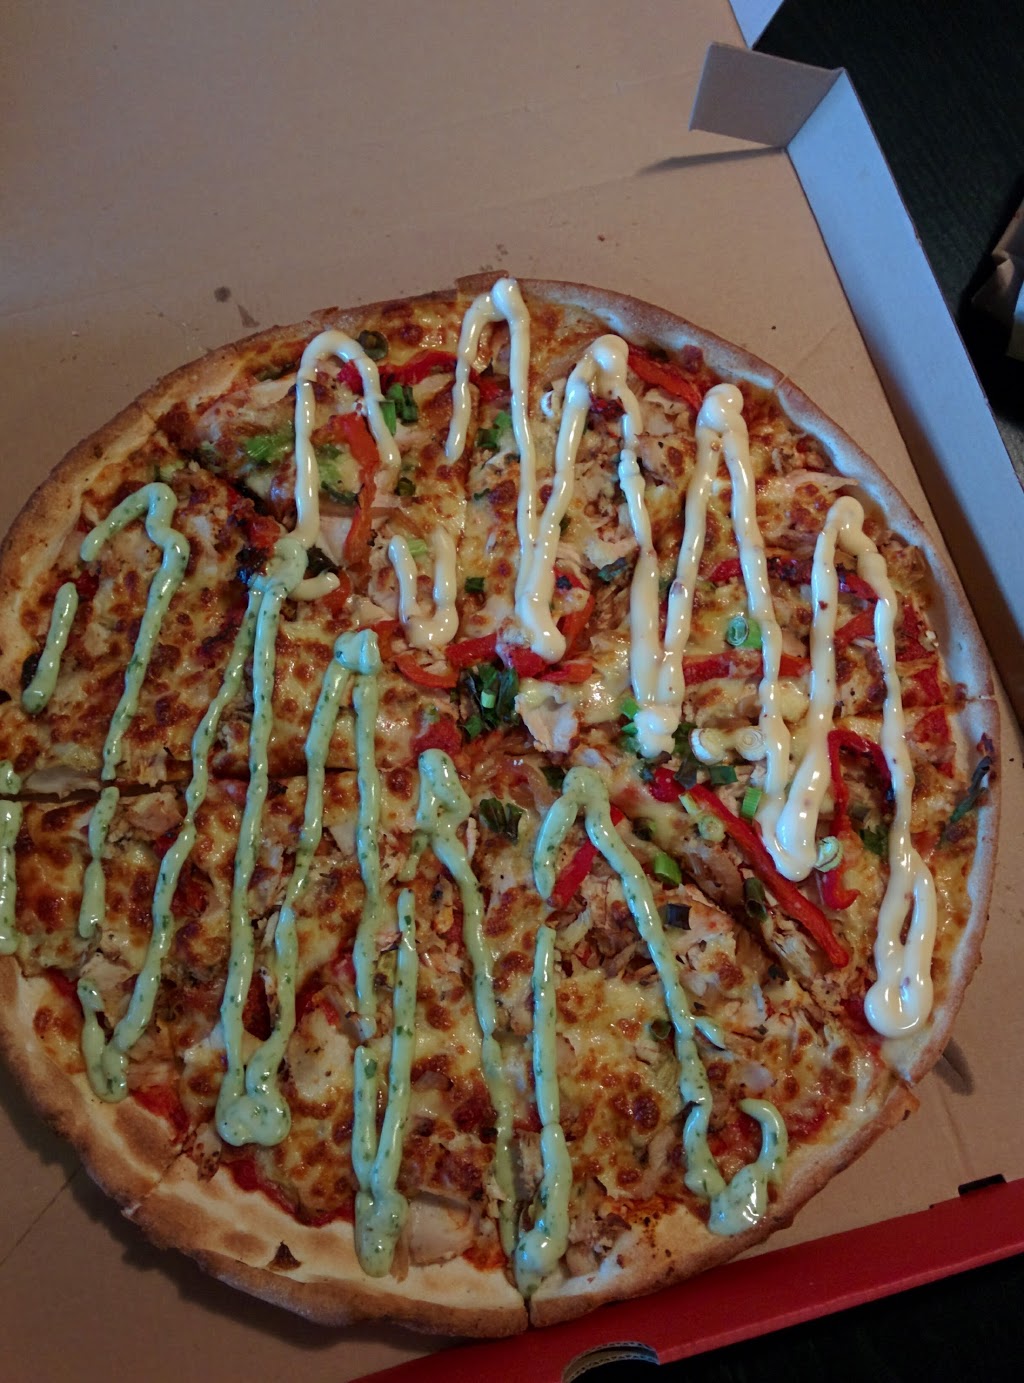 Red Horn Gourmet Pizza & Pasta | meal delivery | 2/645 Princes Hwy, Rockdale NSW 2216, Australia | 0295562020 OR +61 2 9556 2020